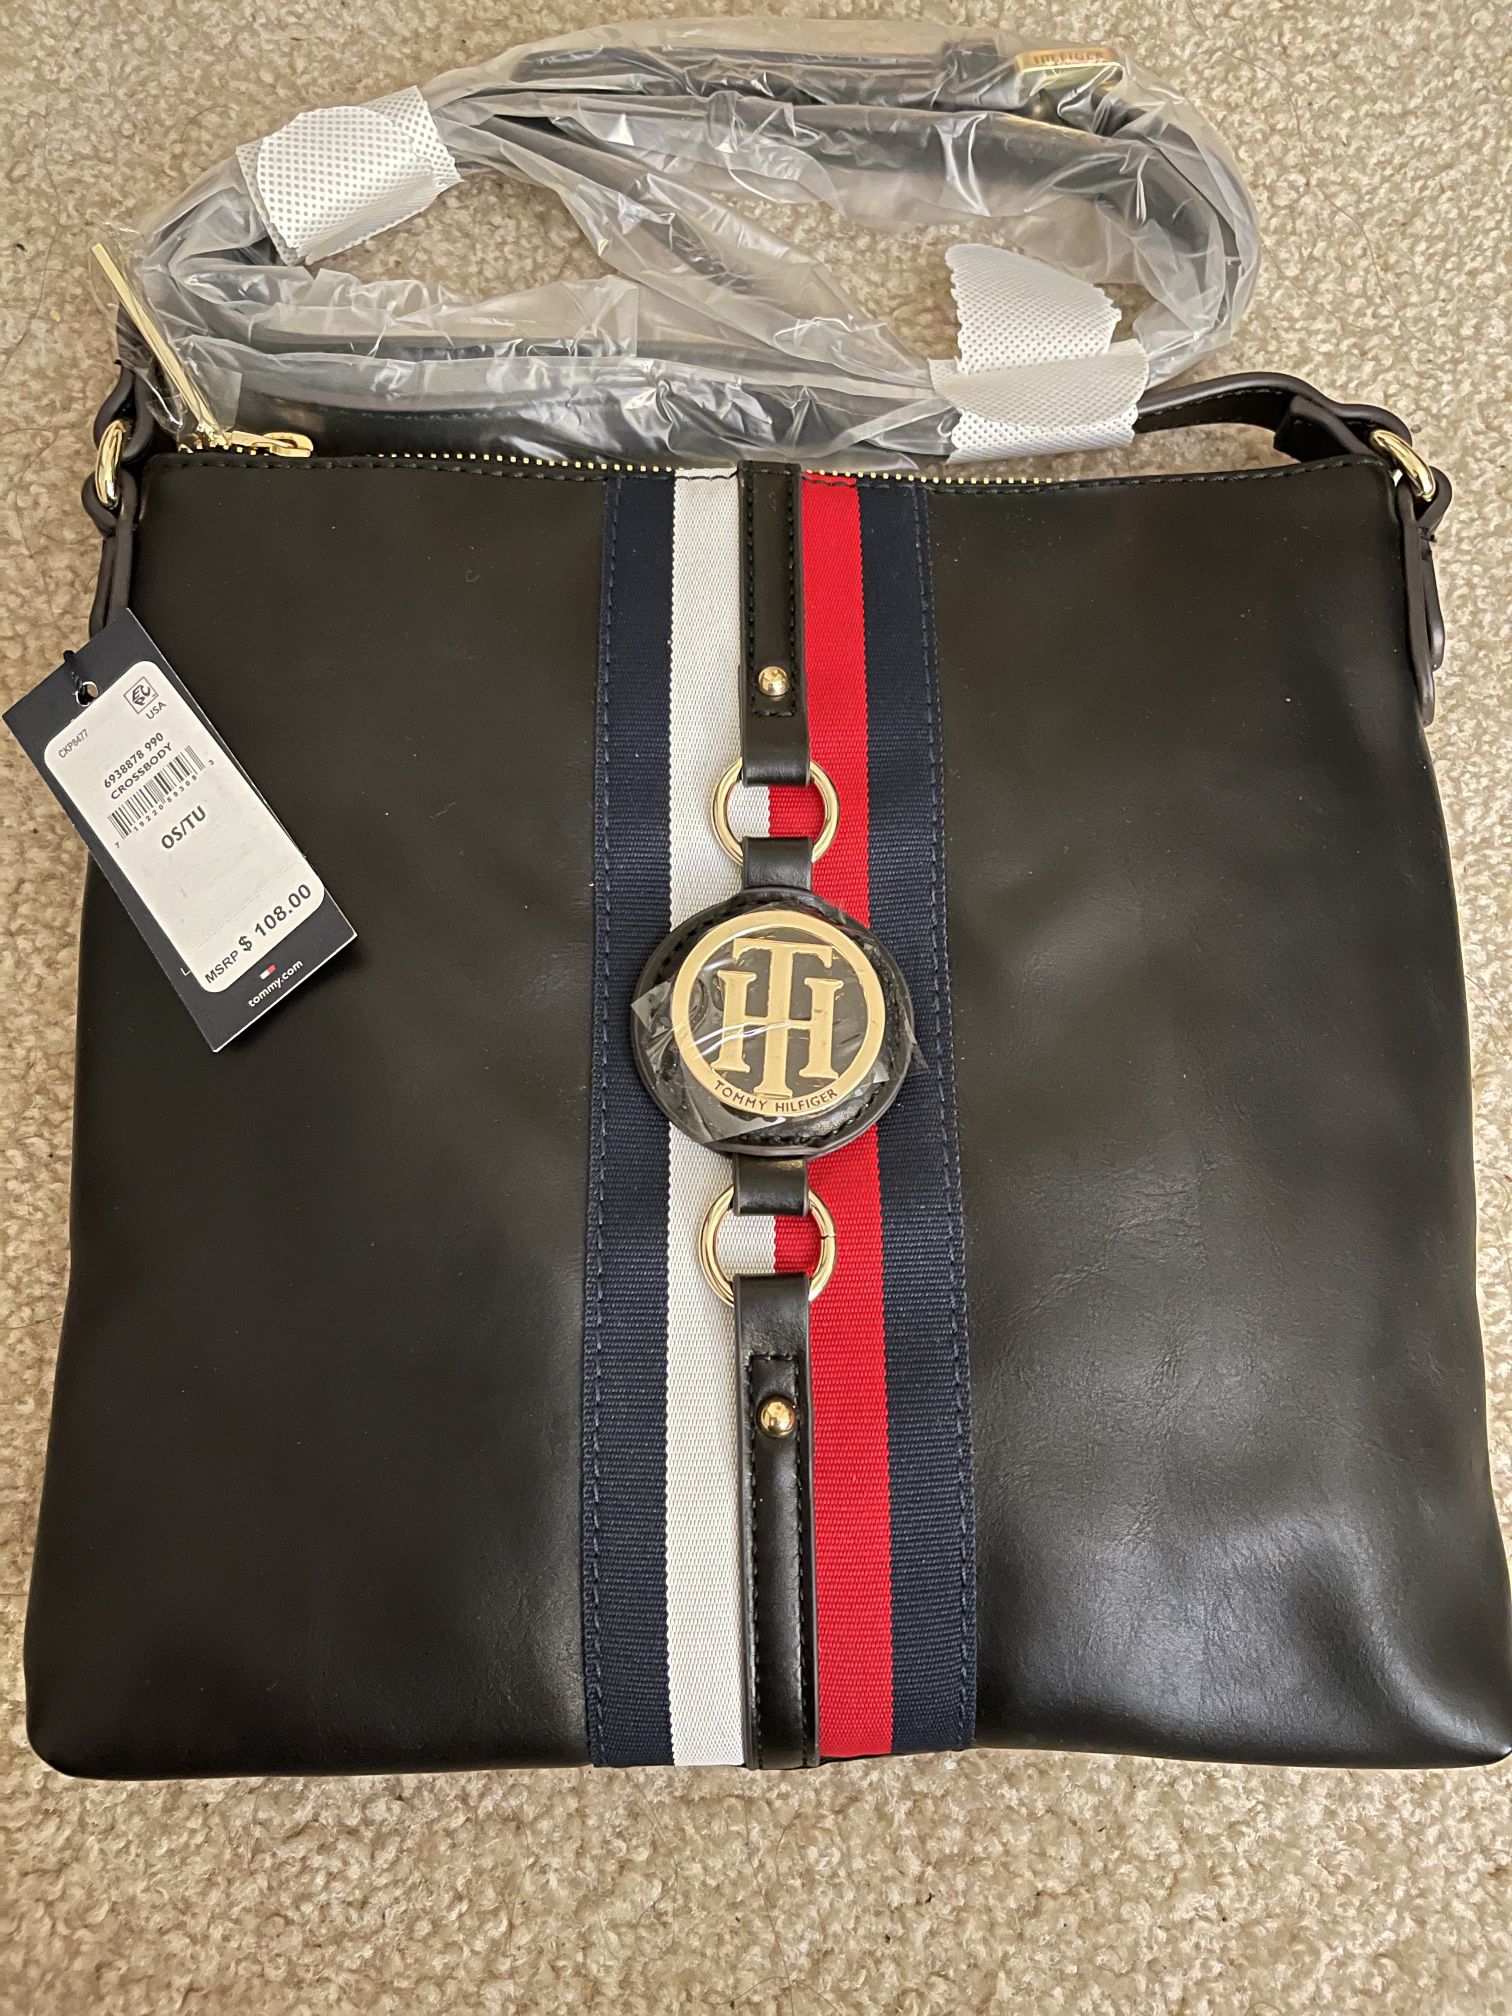 New With Tags Tommy Hilfiger Women's Black Crossbody Bag